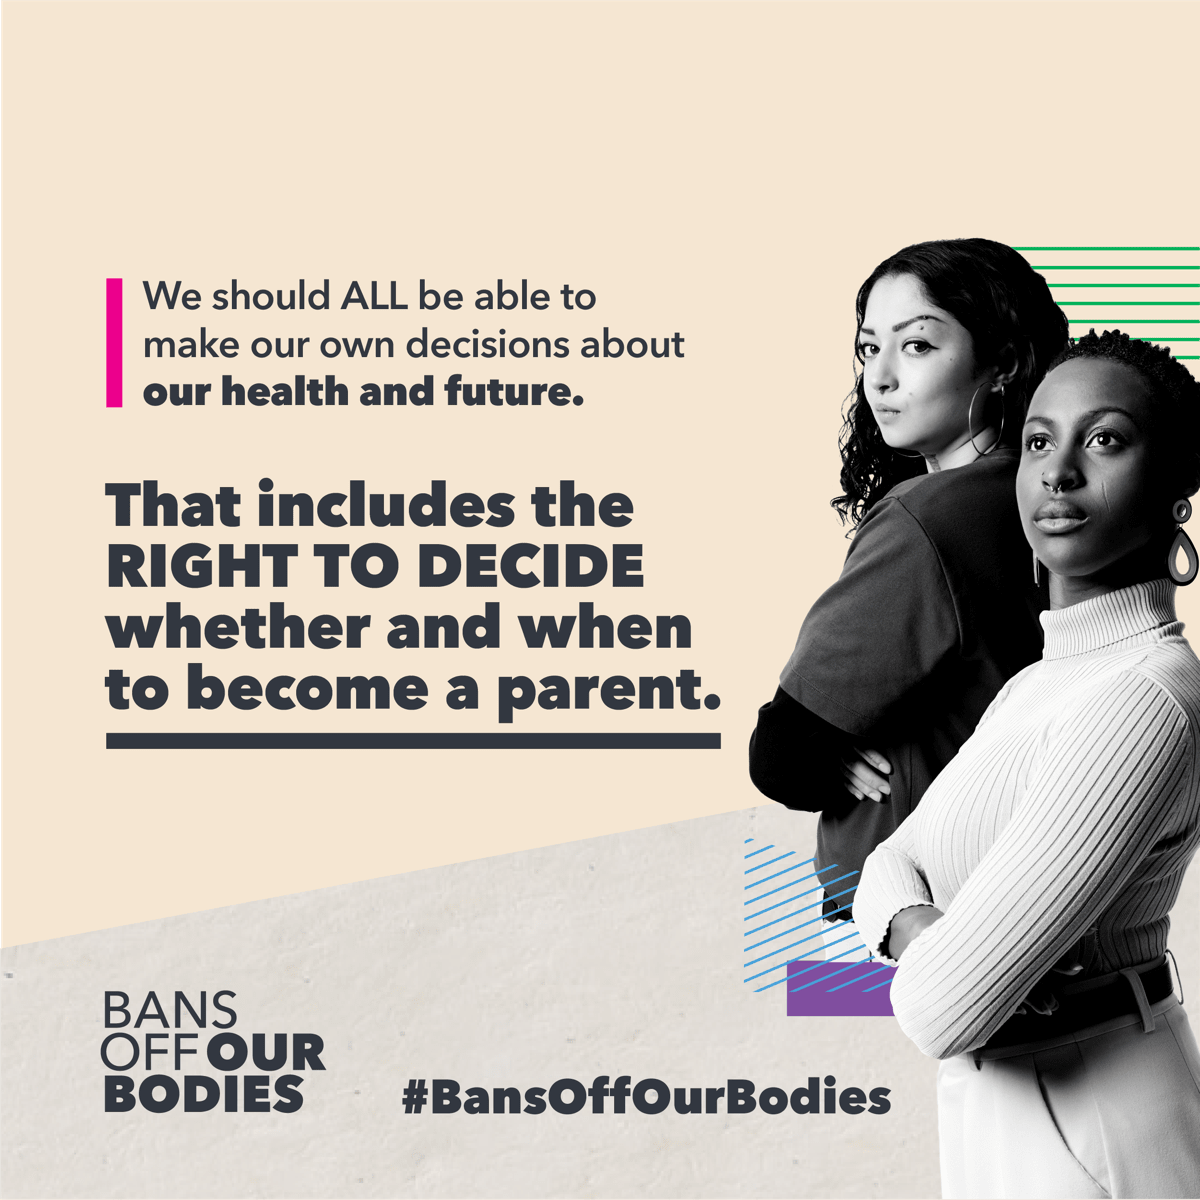 Two people stand with their arms crossed. The Bans Off Our Bodies logo is in the bottom left corner. In the middle, there is text that says "We should all be able to make our own decisions about ourhealth and future. That inclues the right to decide whether and when to become a parent."